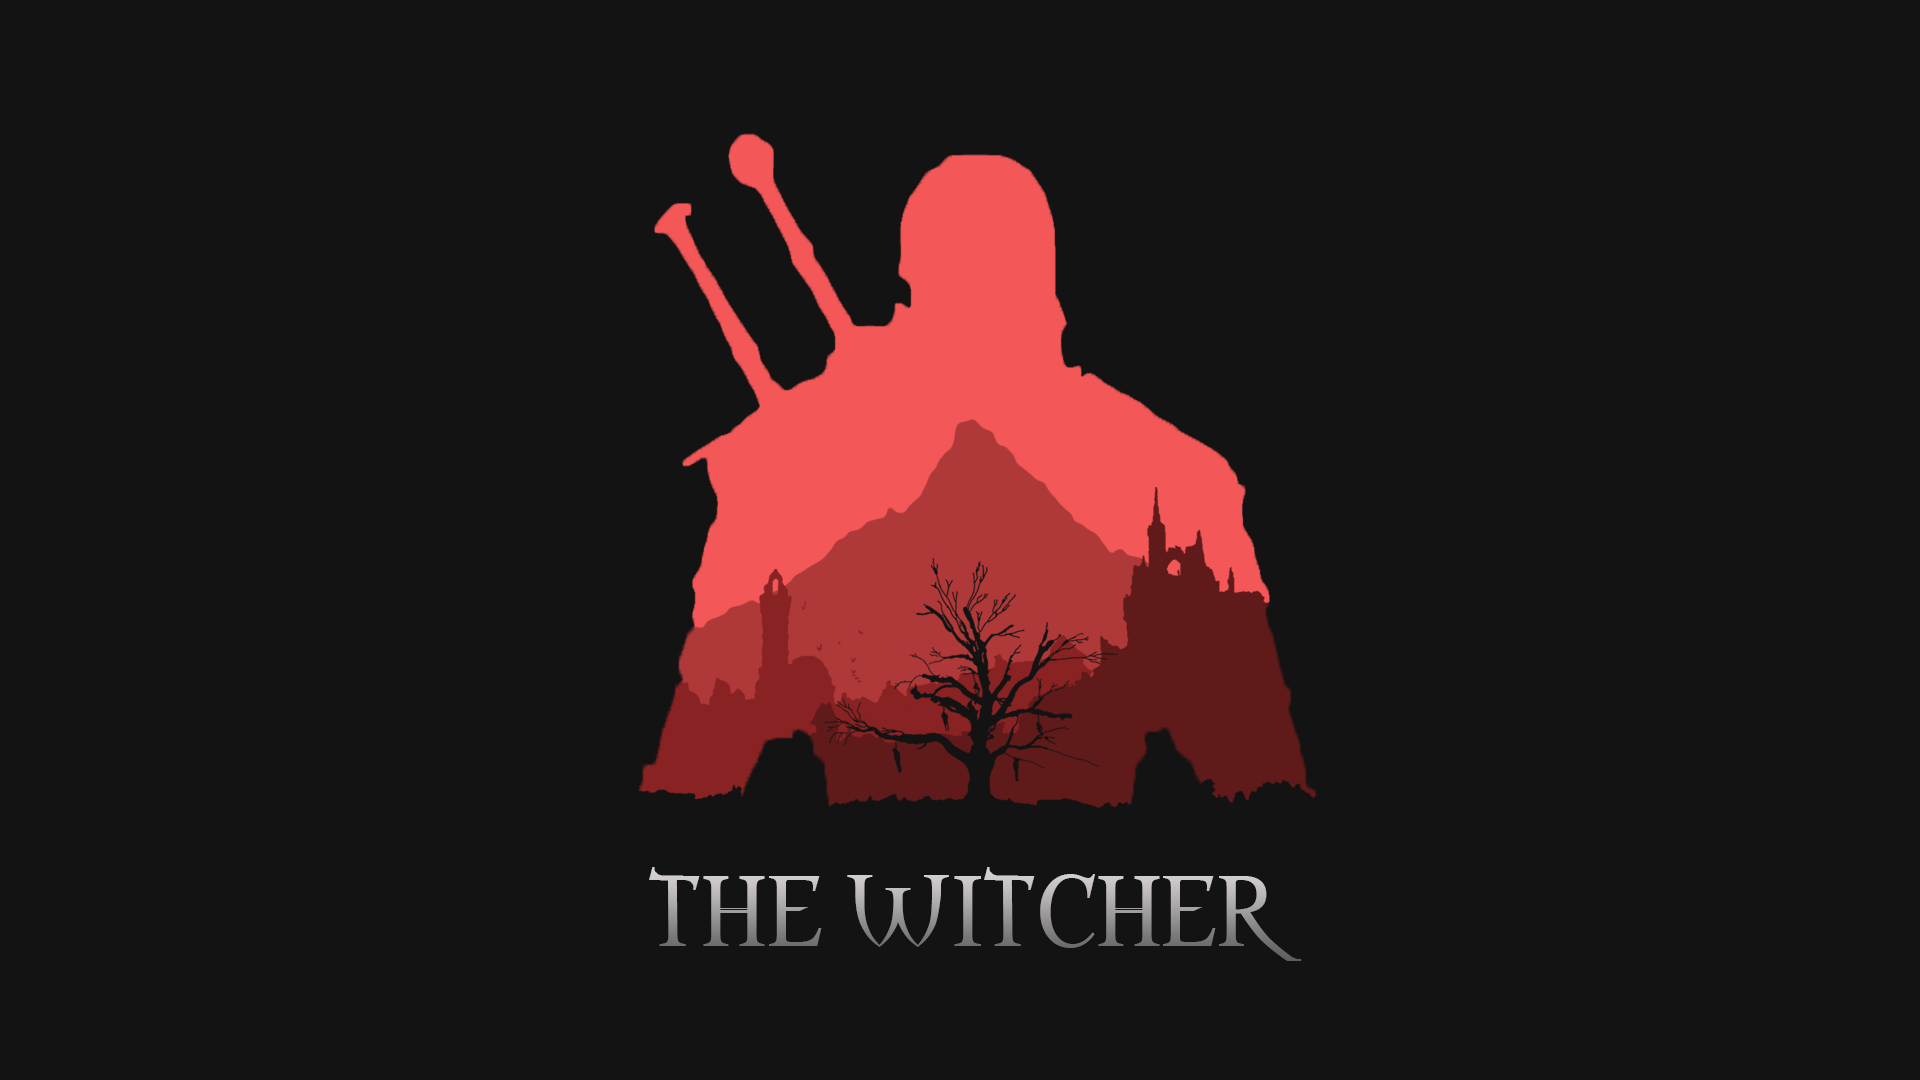 The Witcher Minimalist Wallpaper Free The Witcher